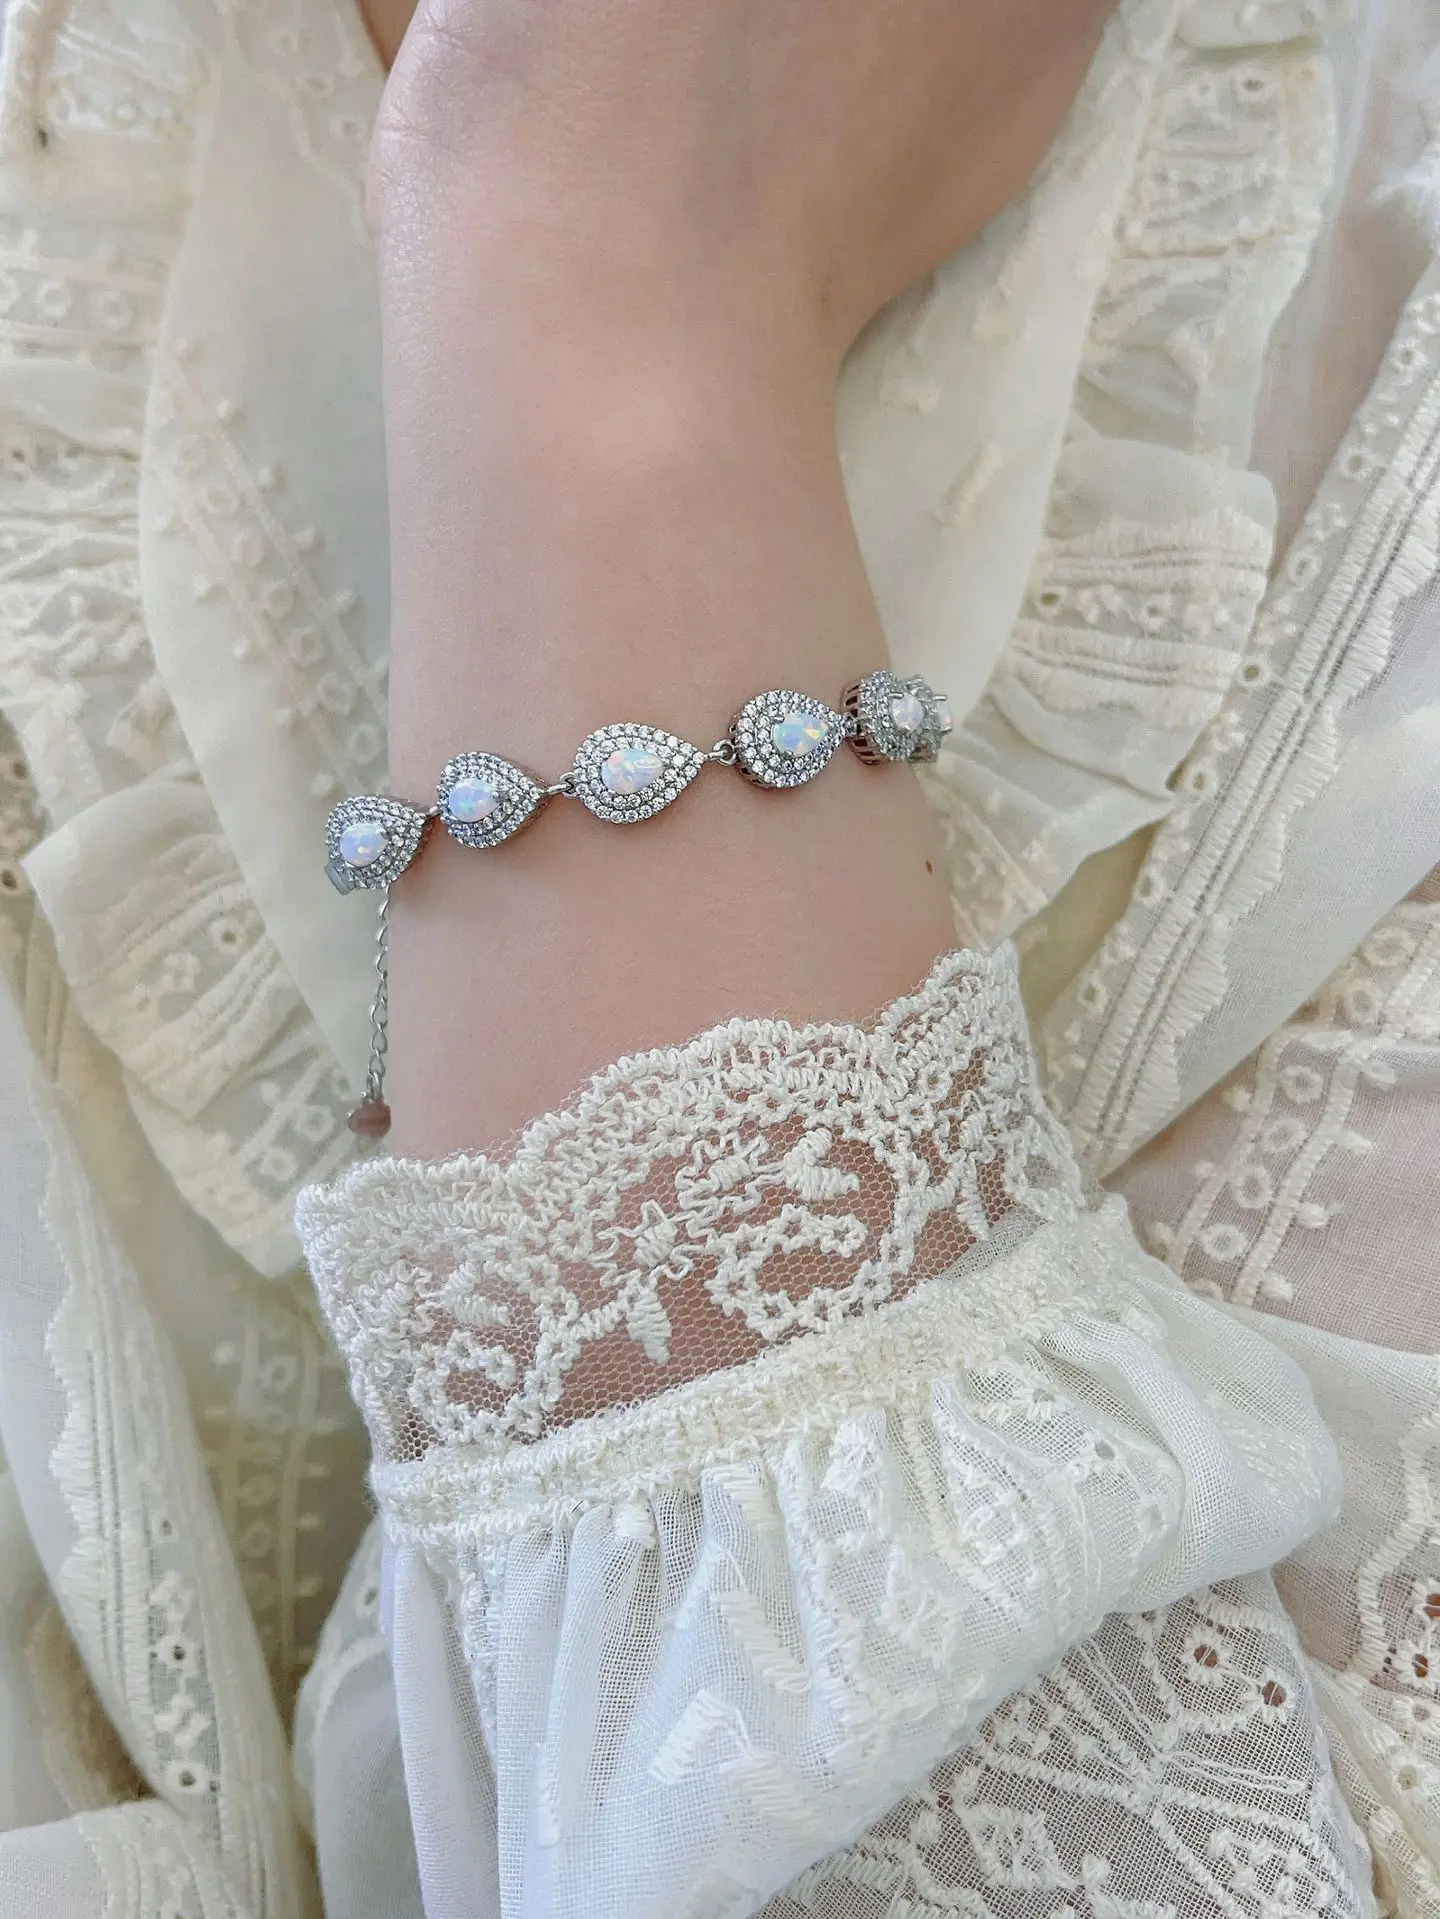 2023 Hot selling S925 Silver Droplet Bracelet with Double Ring Diamonds and White Opal Simple Handicraft Fashion Bracelet